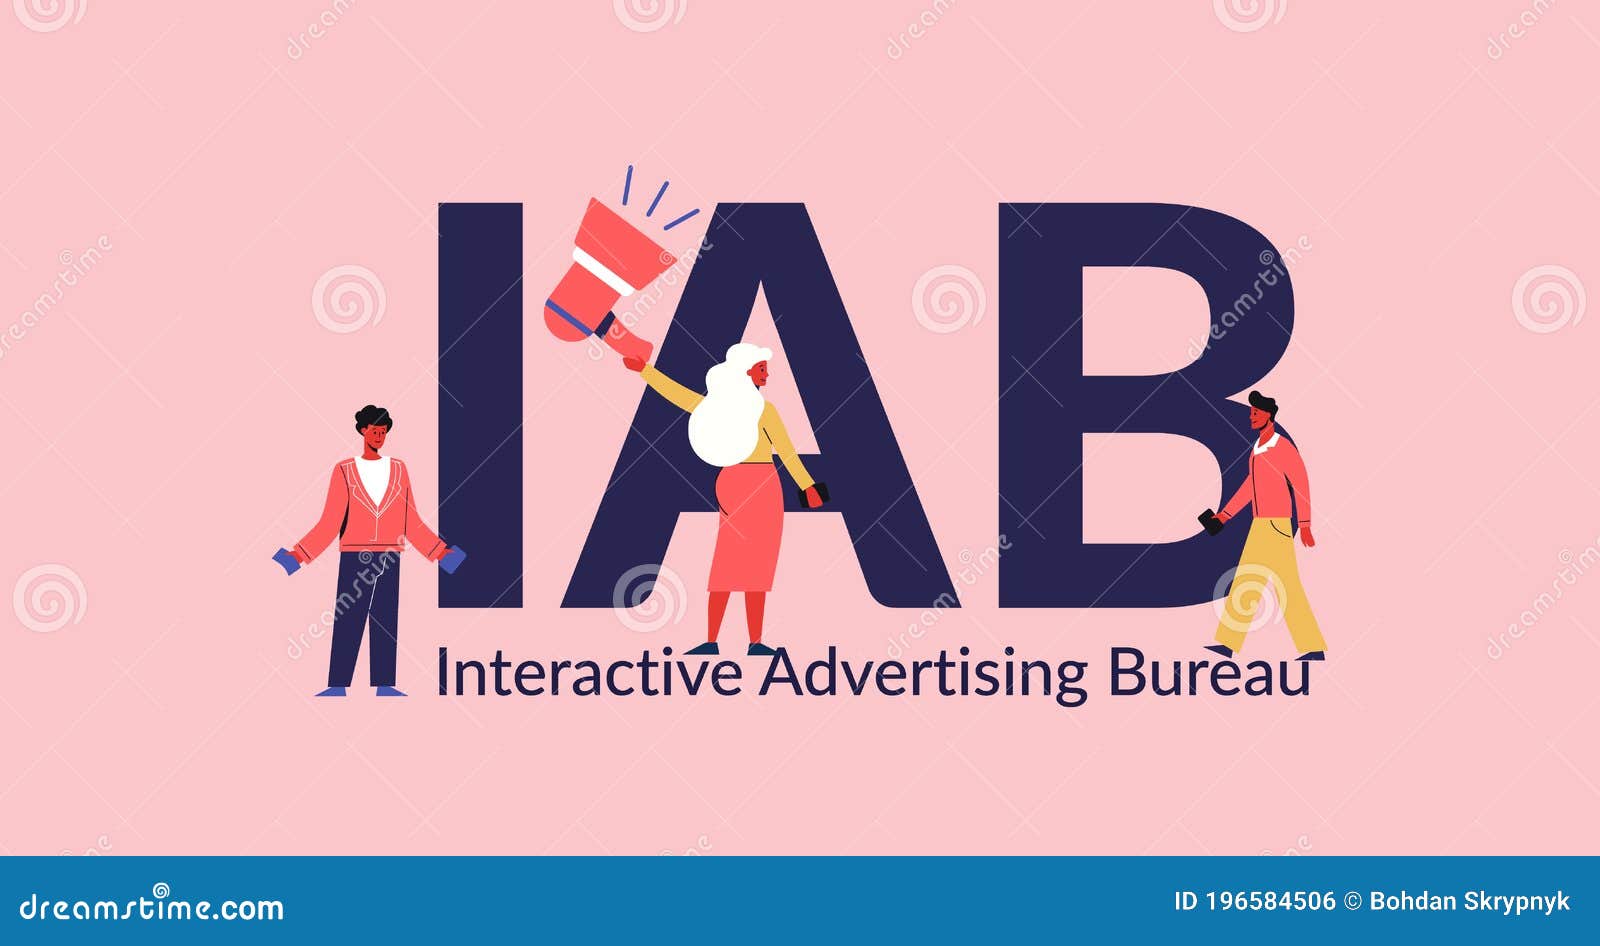 iab interactive advertising bureau. marketing information business and promotion of services.